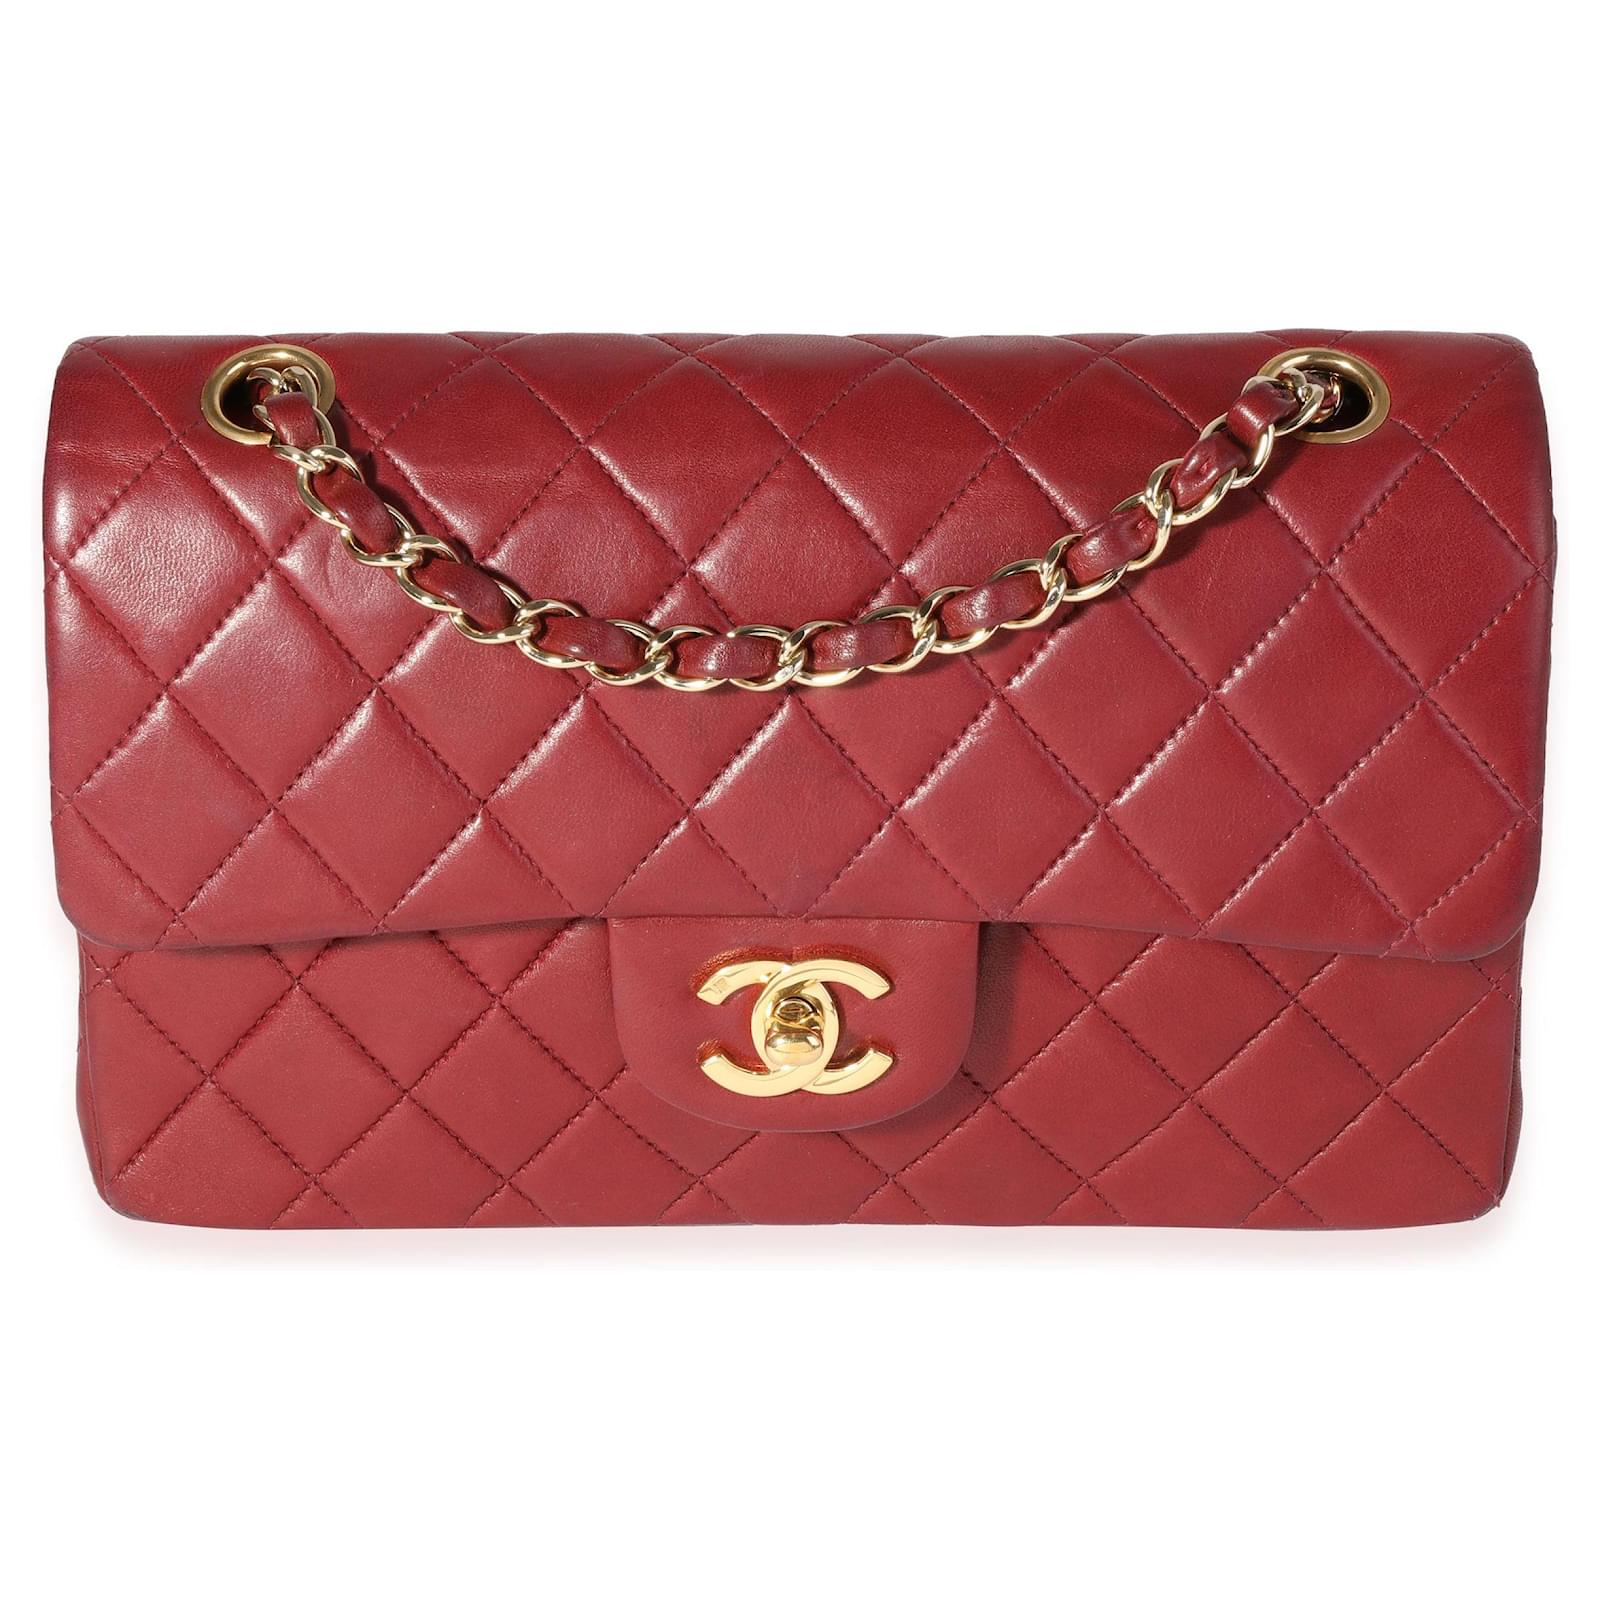 Vintage and Musthaves. Chanel small 2.55 timeless classic double flap bag